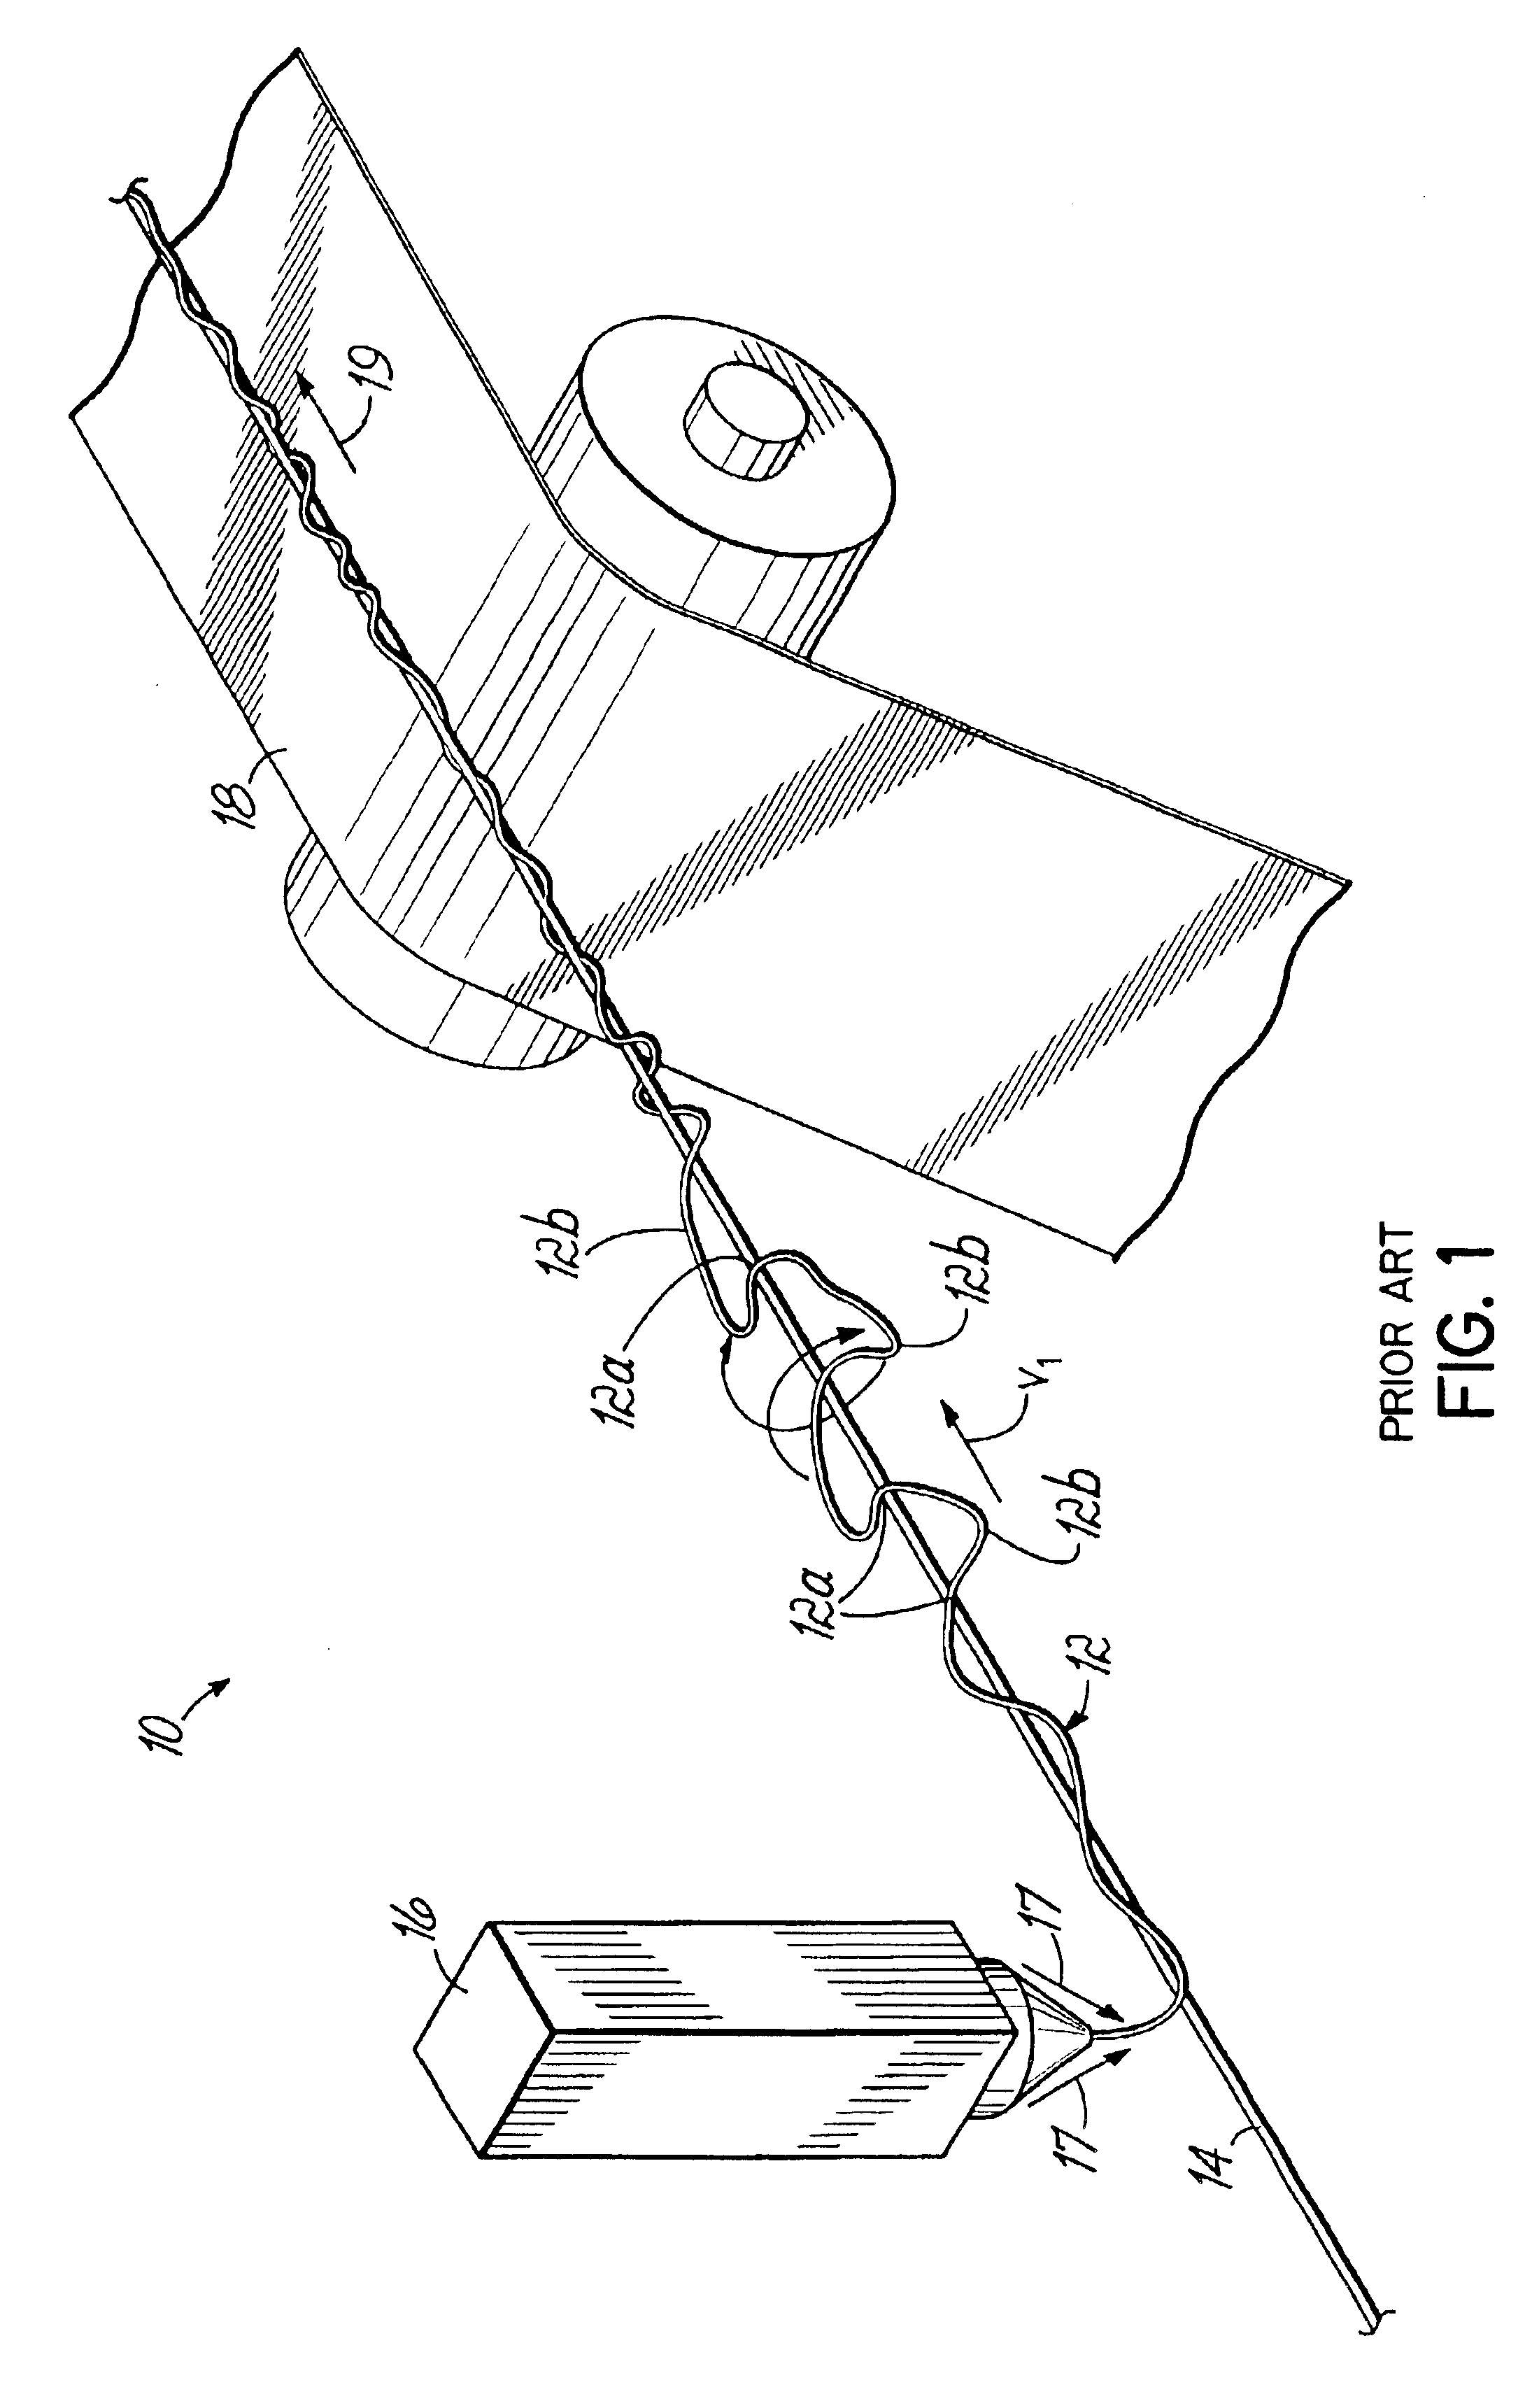 Apparatus and methods for applying adhesive filaments onto one or more moving narrow substrates